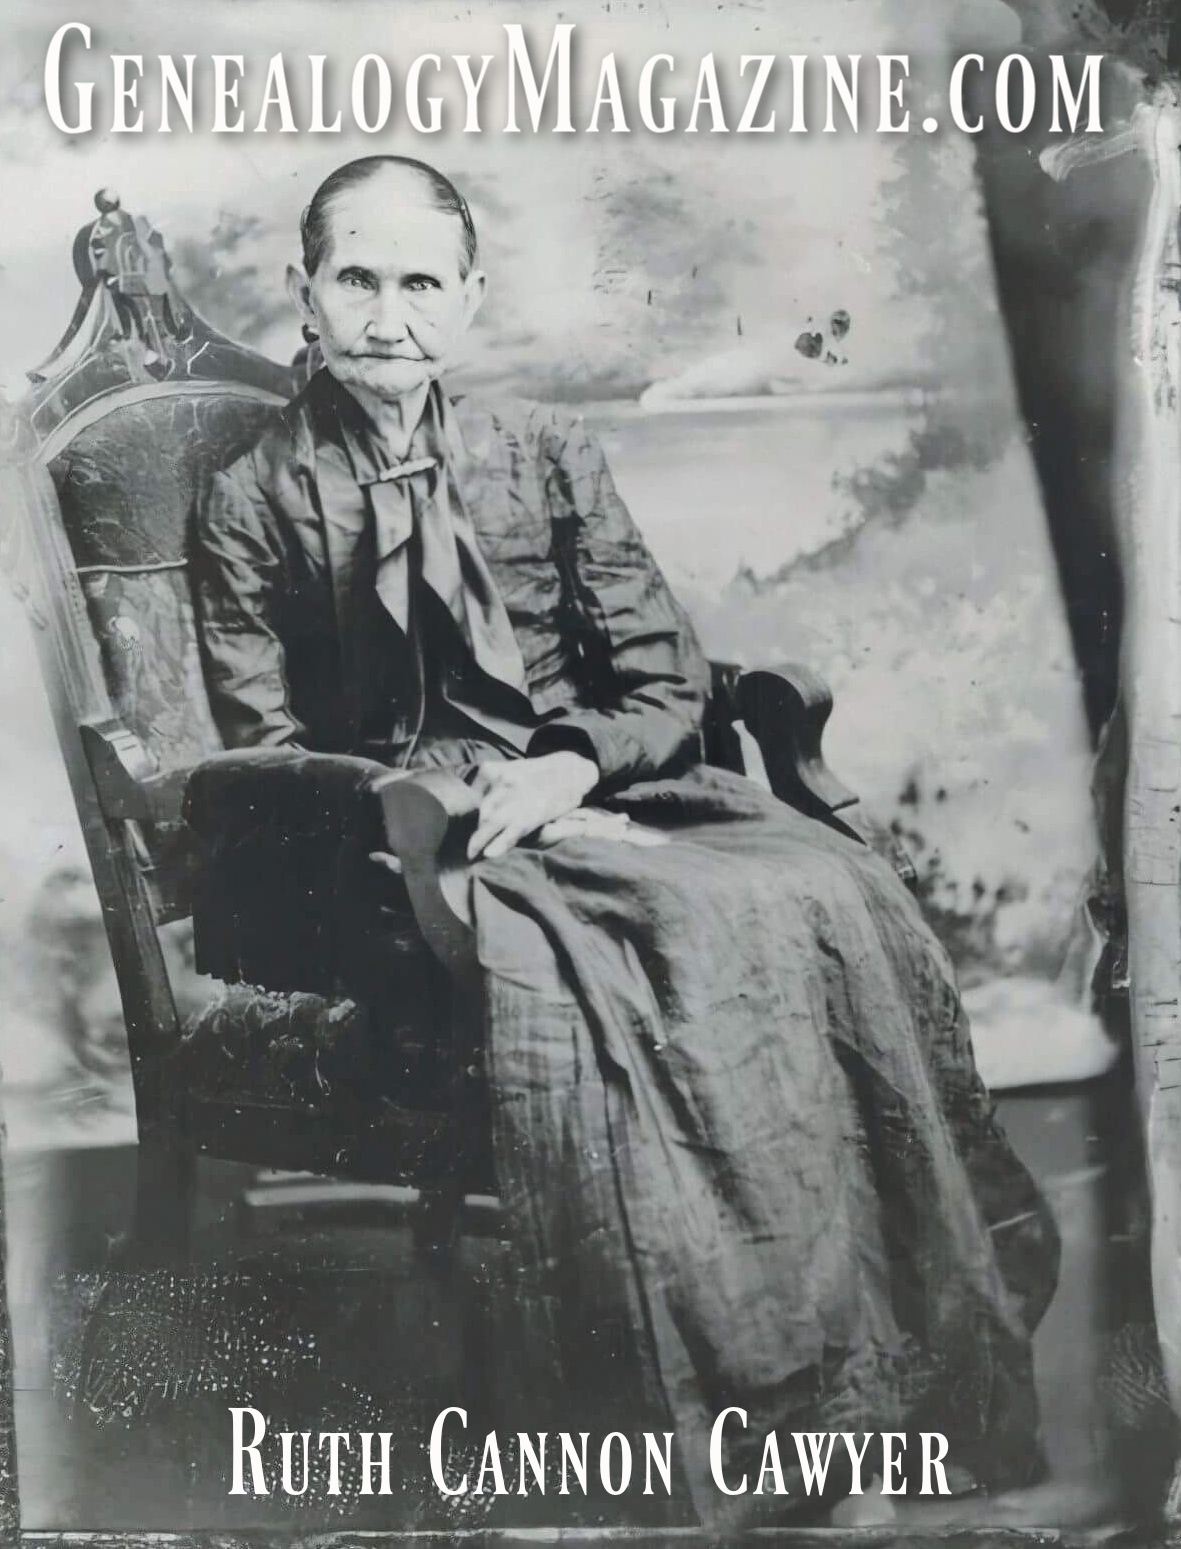 Ruth Cannon Cawyer